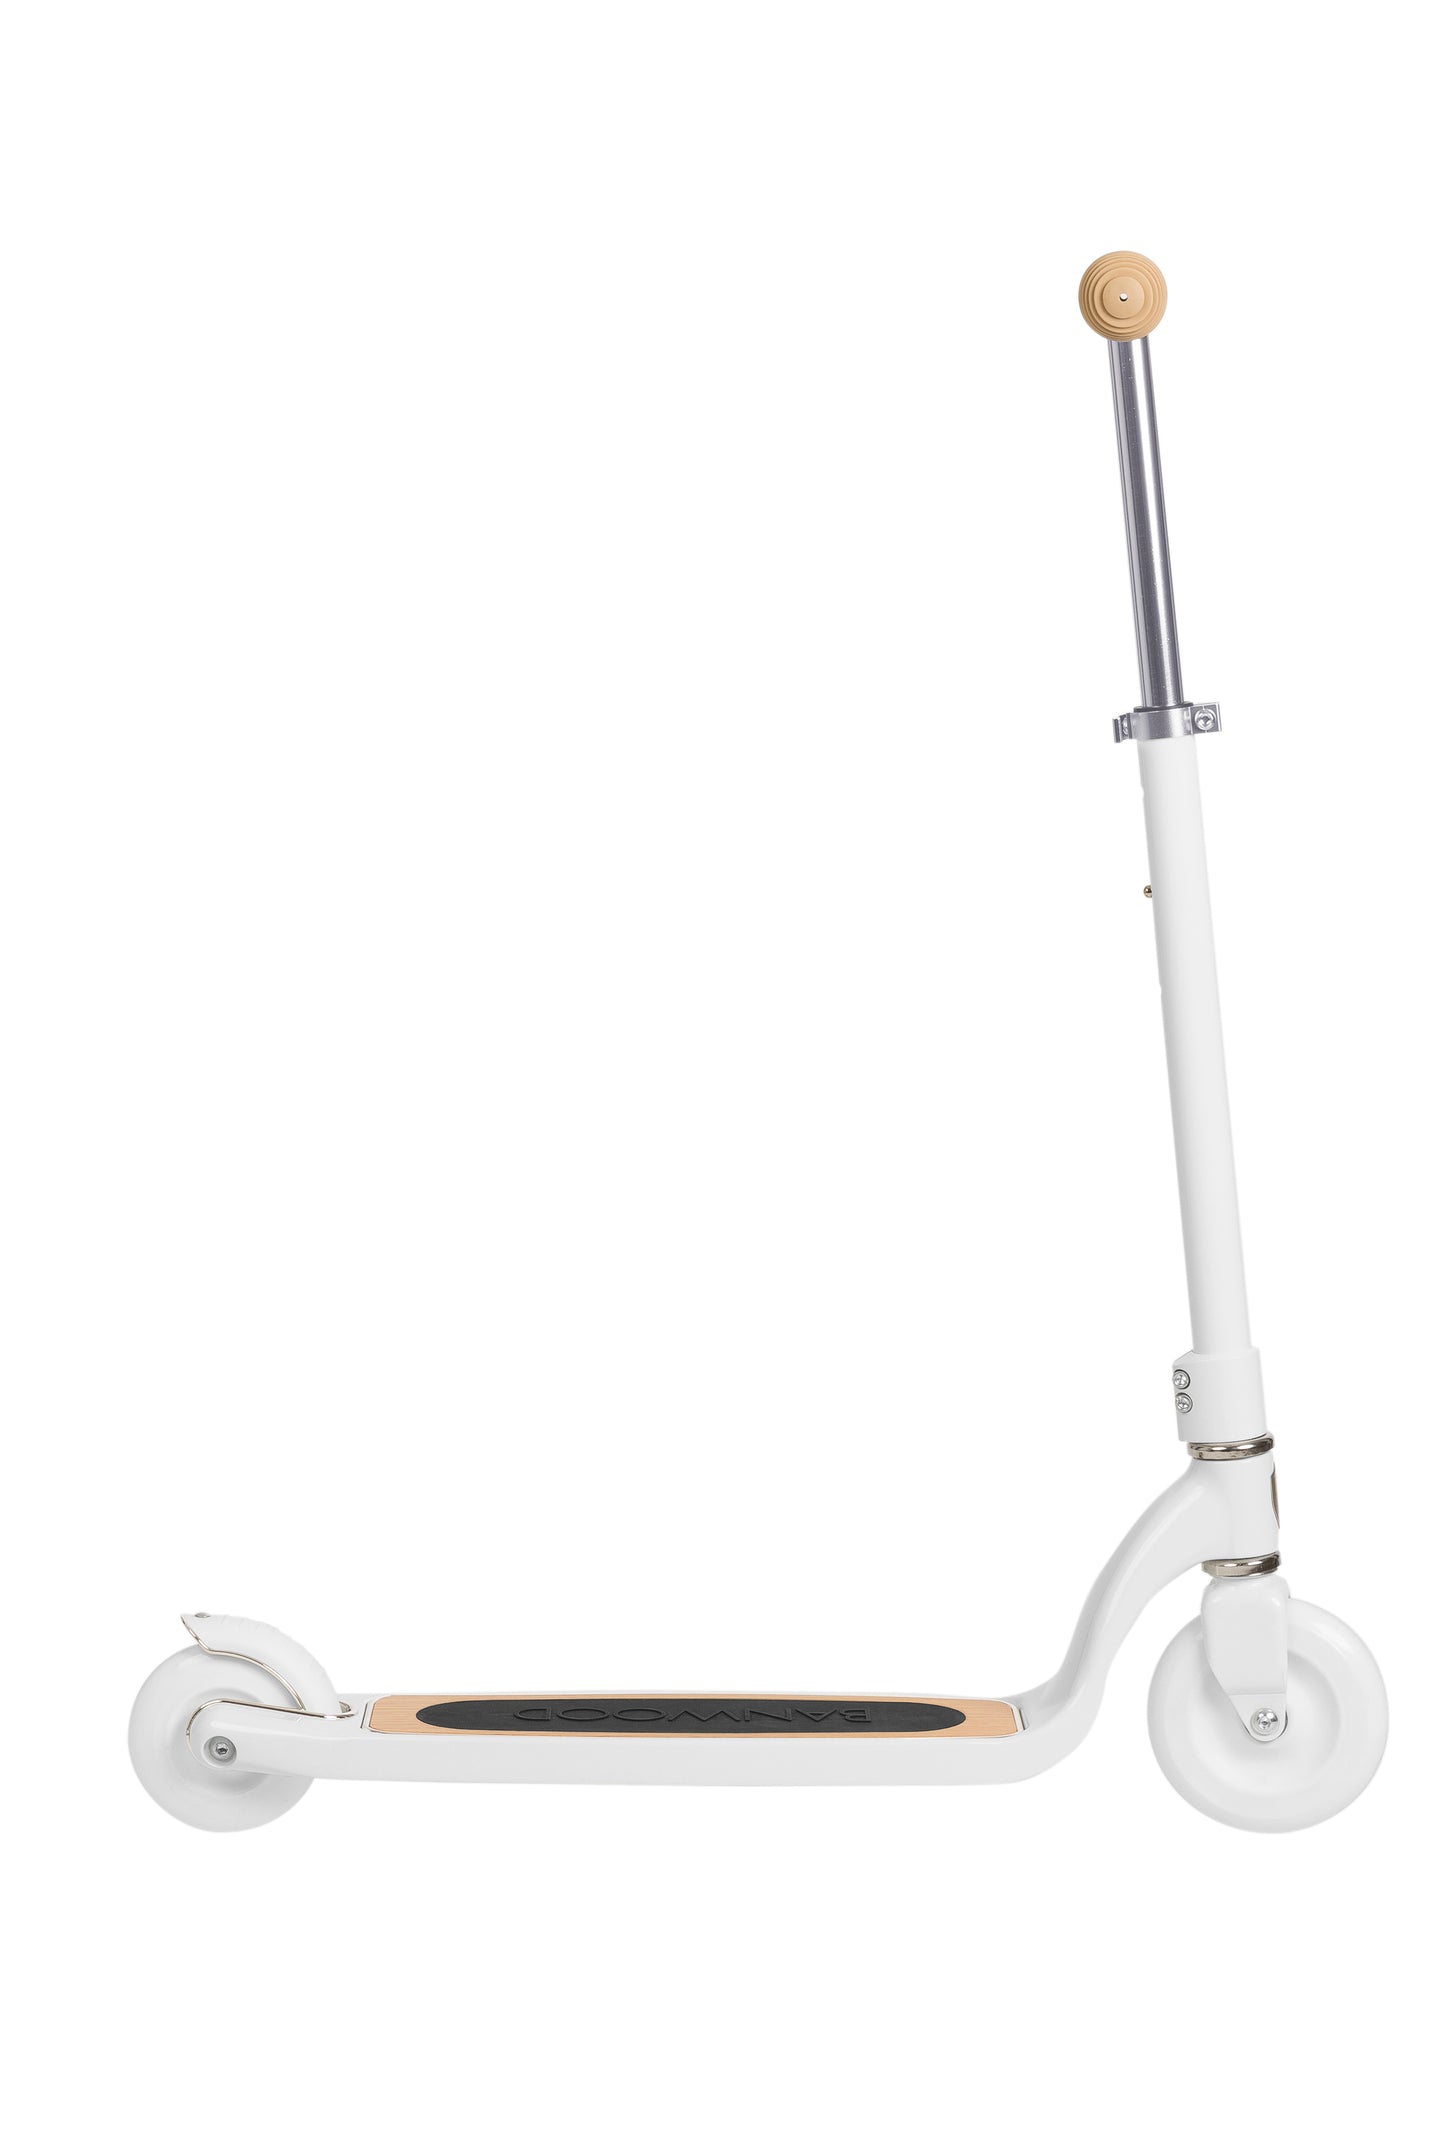 Maxi Scooter - White - pre-order / back in stock End of February